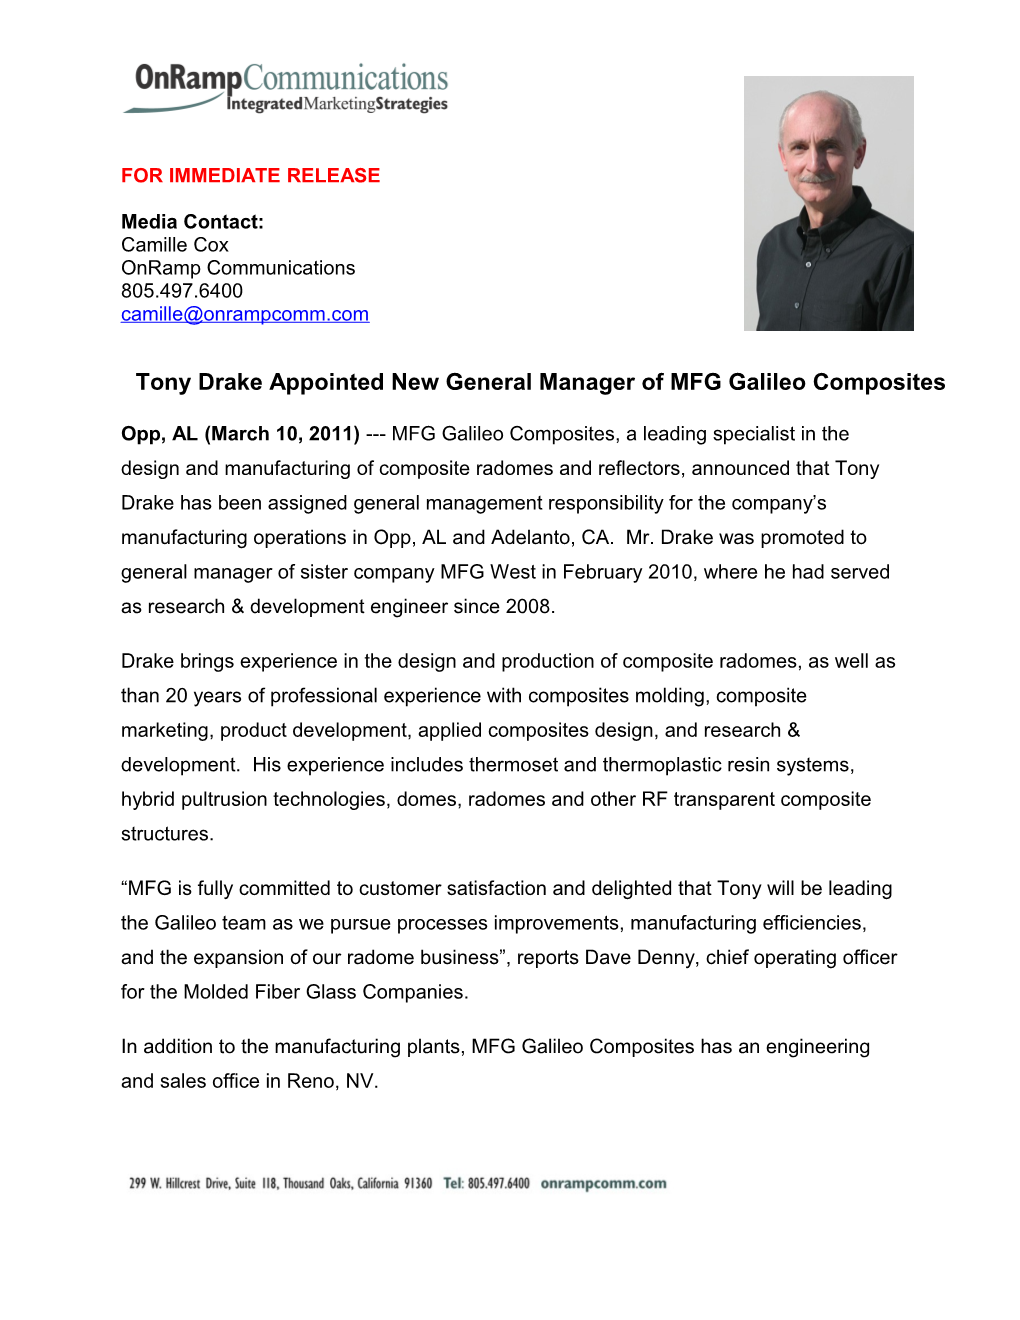 MFG Galileo Composites Appoints Tony Drake to General Manager